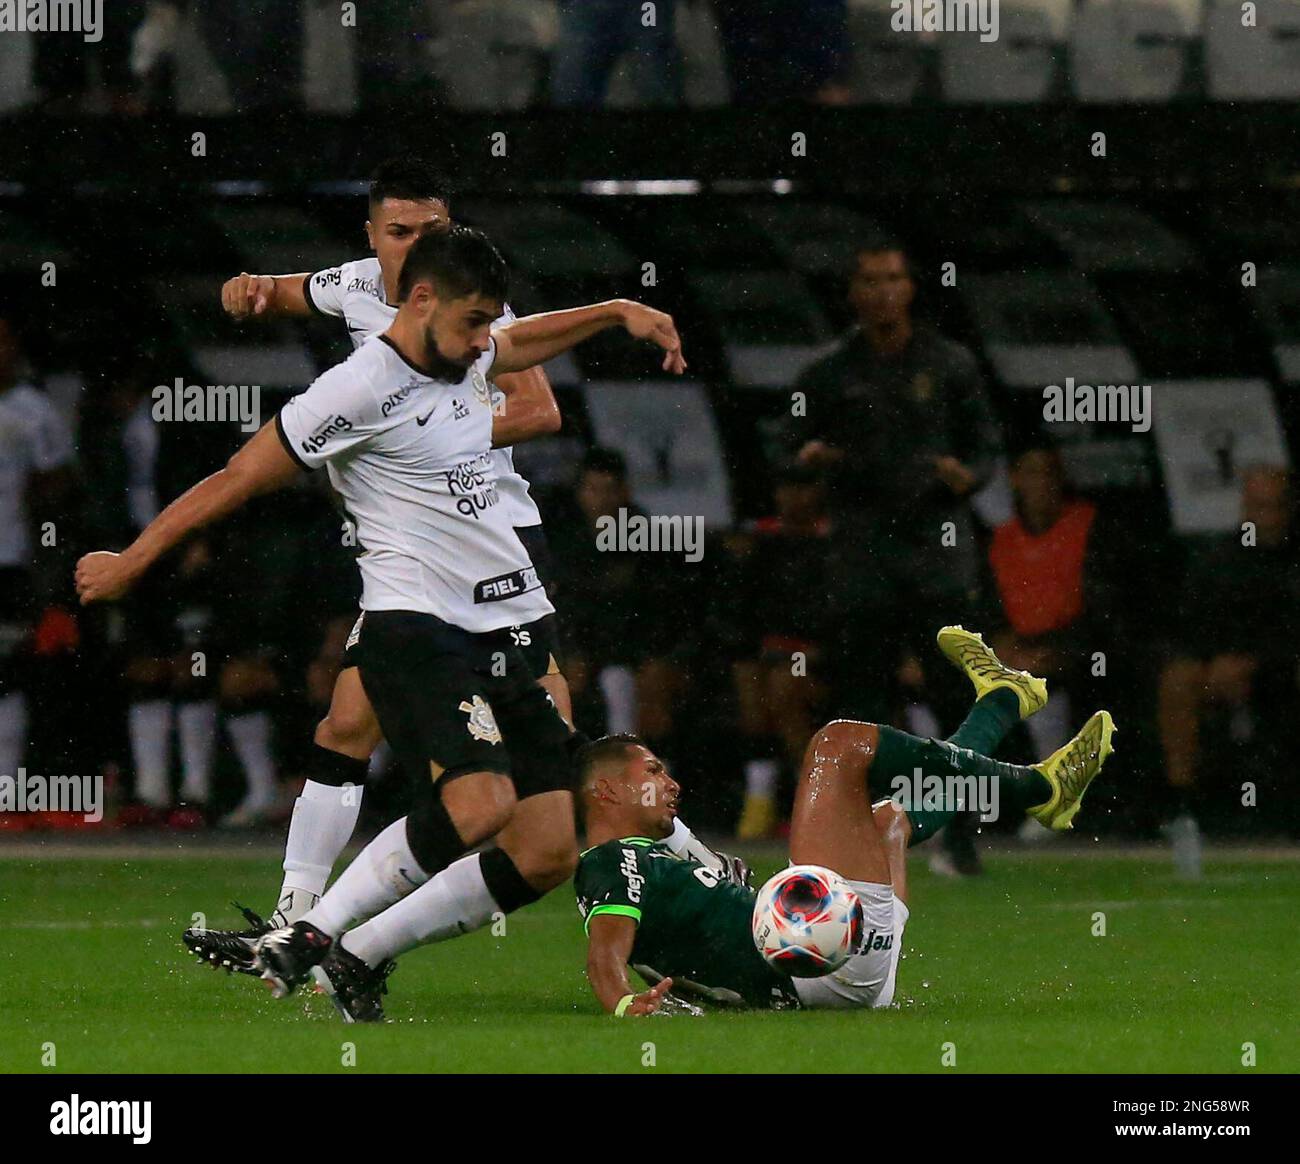 Sao Paulo, Brazil. 16th Feb, 2023. Bruno Mendez during a match between Corinthians and Palmeiras at Neo Quimica Arena in Sao Paulo, Brazil (Fernando Roberto/SPP) Credit: SPP Sport Press Photo. /Alamy Live News Stock Photo